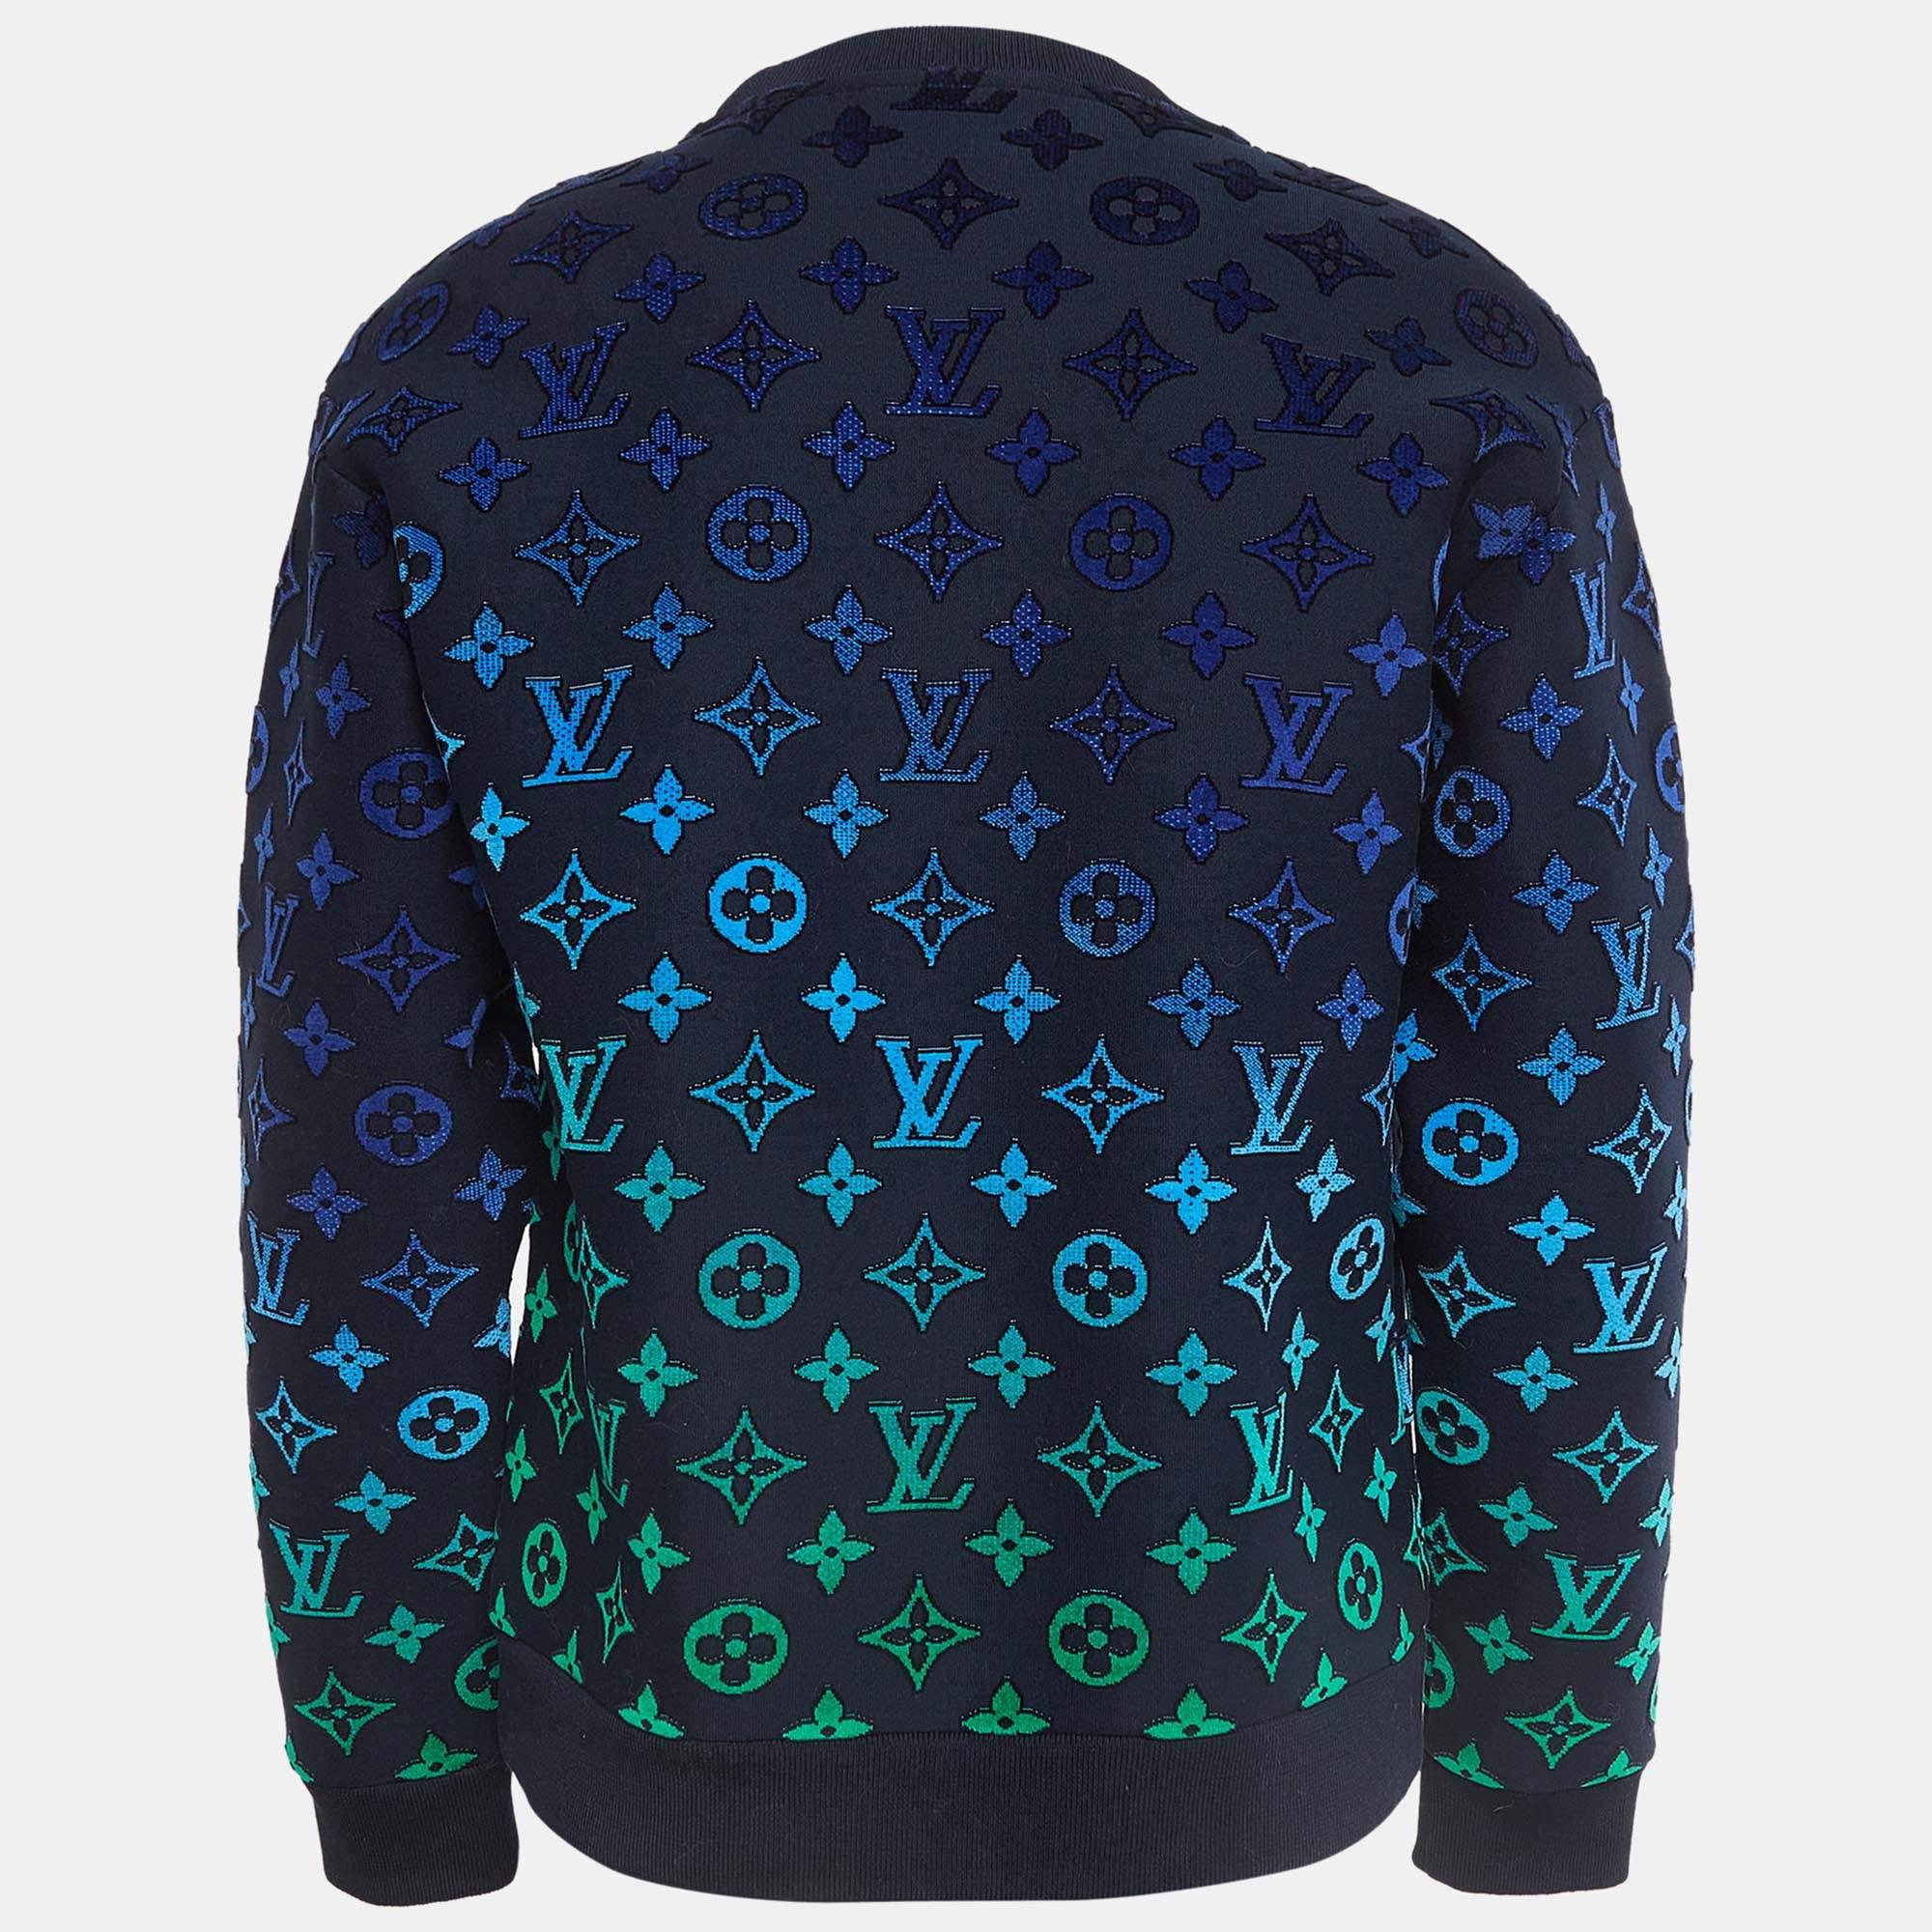 Sweatshirts like this are the best pick on days you want to dress comfortably. Made from quality fabrics, this sweatshirt is enhanced with a classy hue, attractive designs, and a cozy fit.

Includes: brand tag
